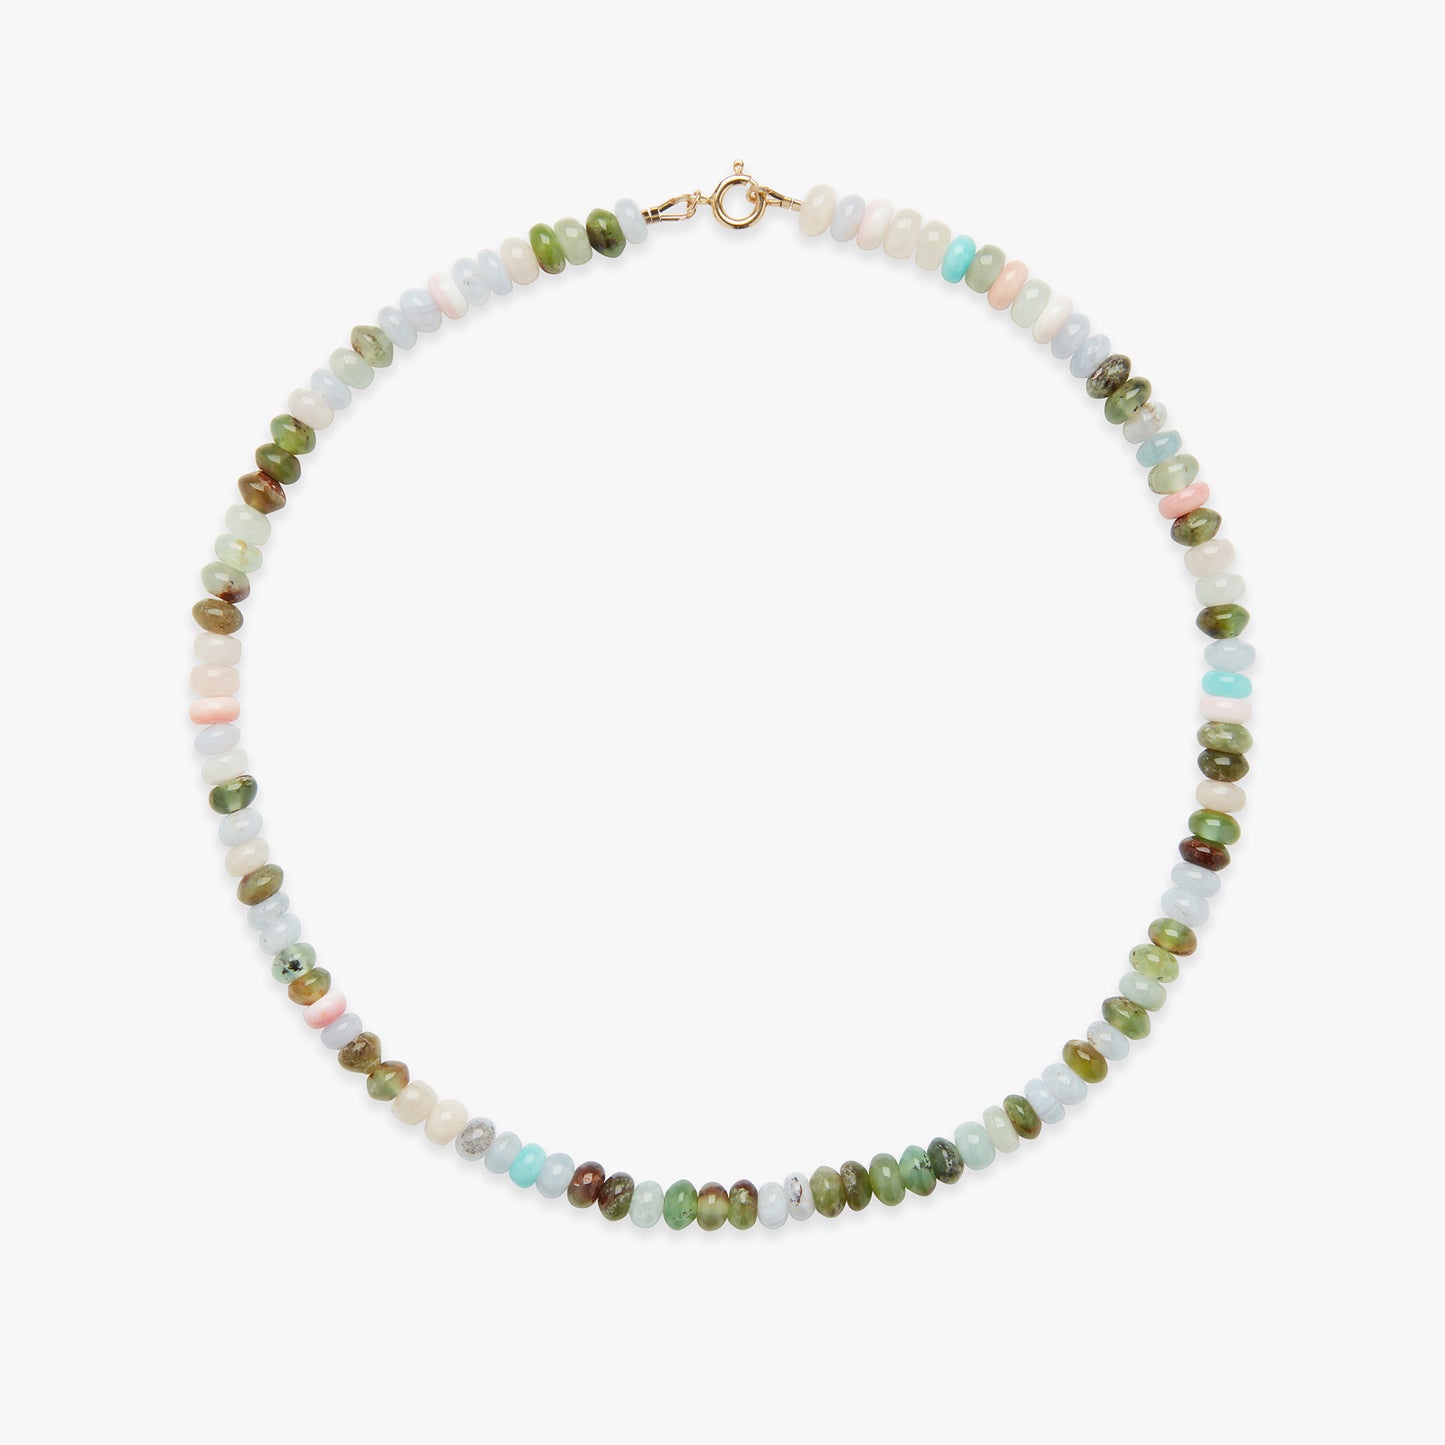 LaWa gemstone necklace gold filled